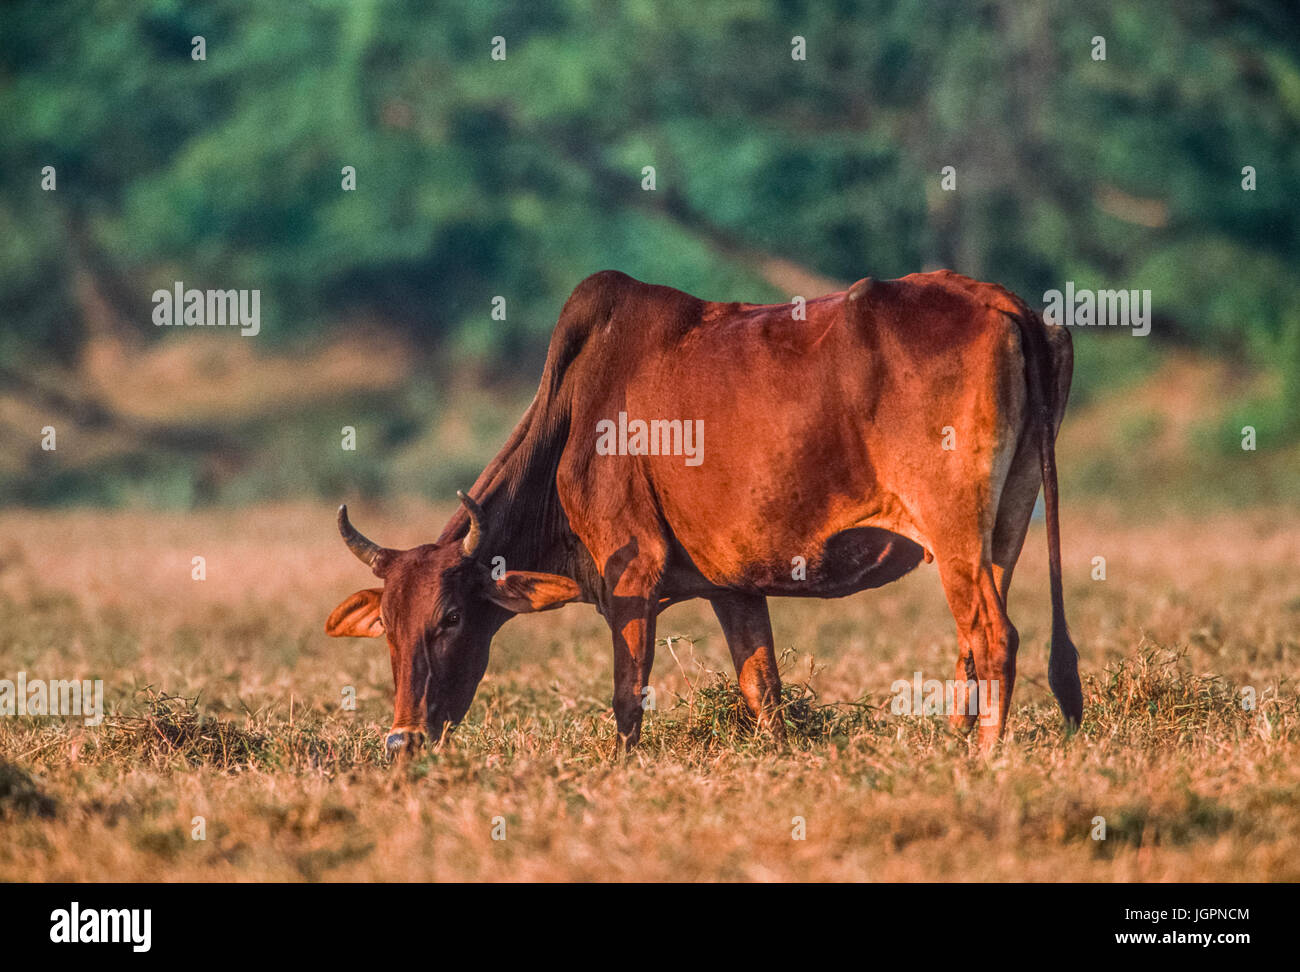 Zebù Cow, Brahman Cow o Brahma Cow, Bos indicus, pascolo in prateria, Keoladeo Ghana National Park, Bharatpur, Rajasthan, India Foto Stock